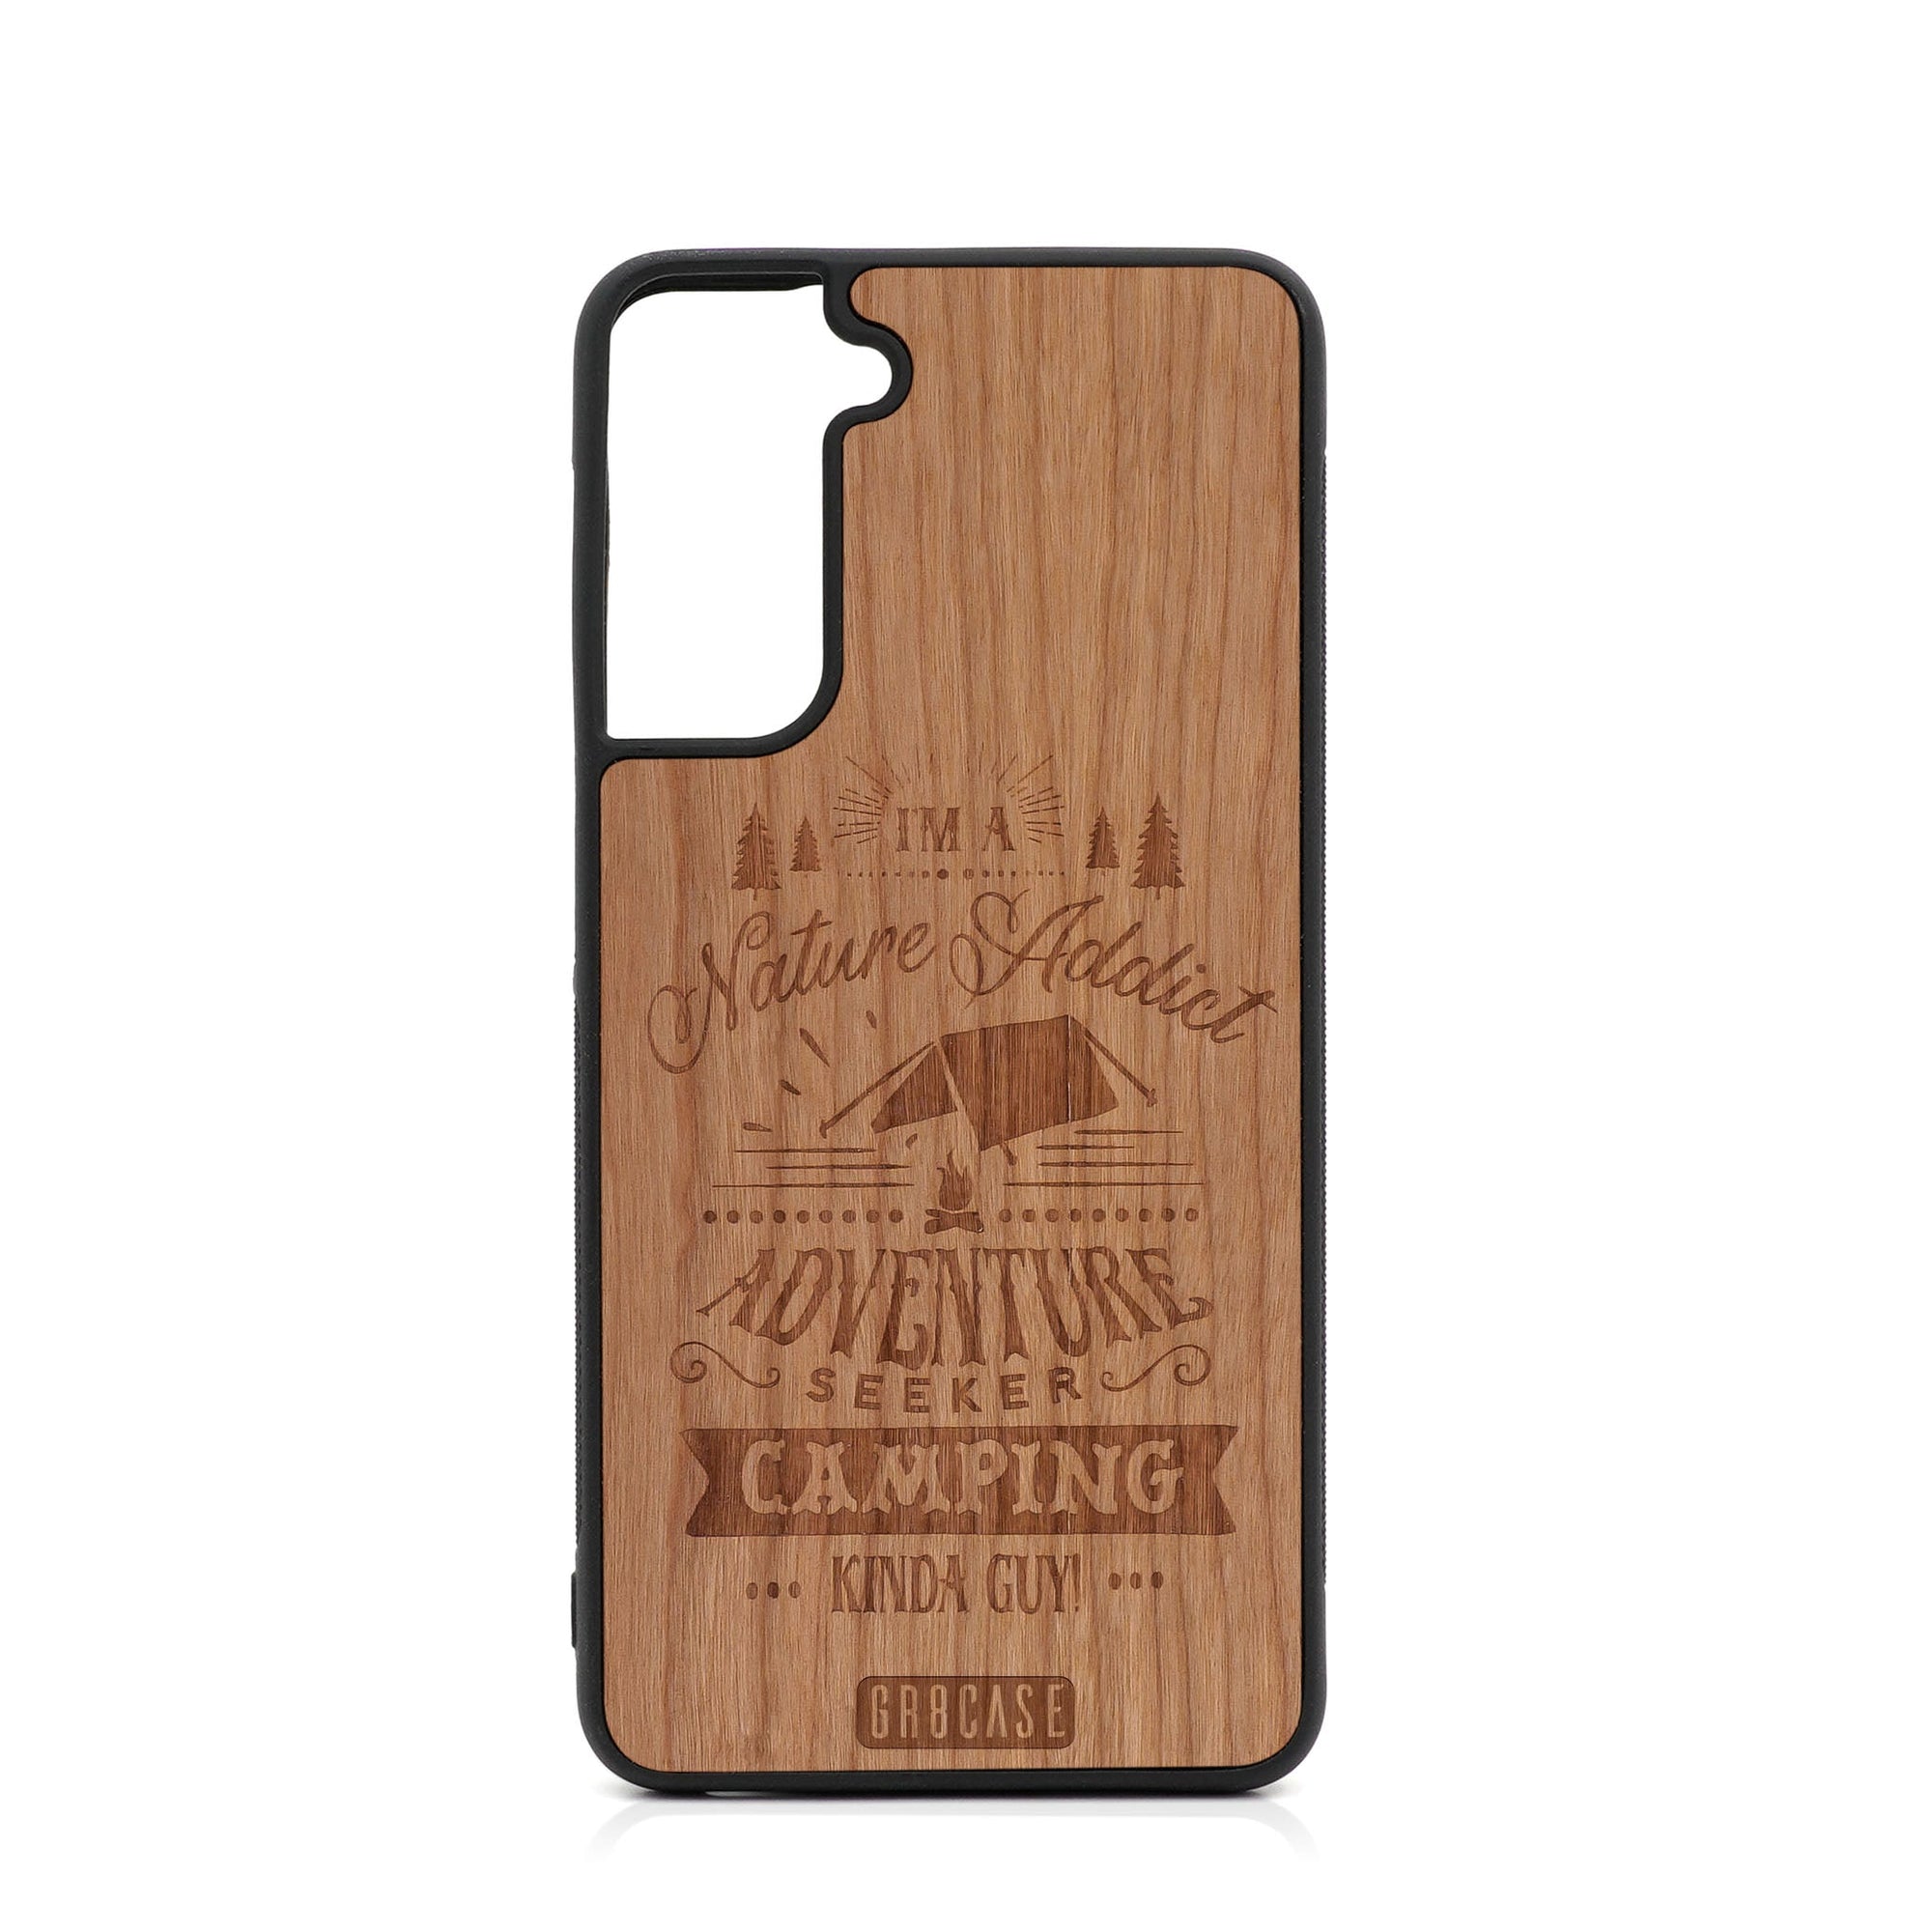 I'm A Nature Addict Adventure Seeker Camping Kinda Guy Design Wood Case For Samsung Galaxy S22